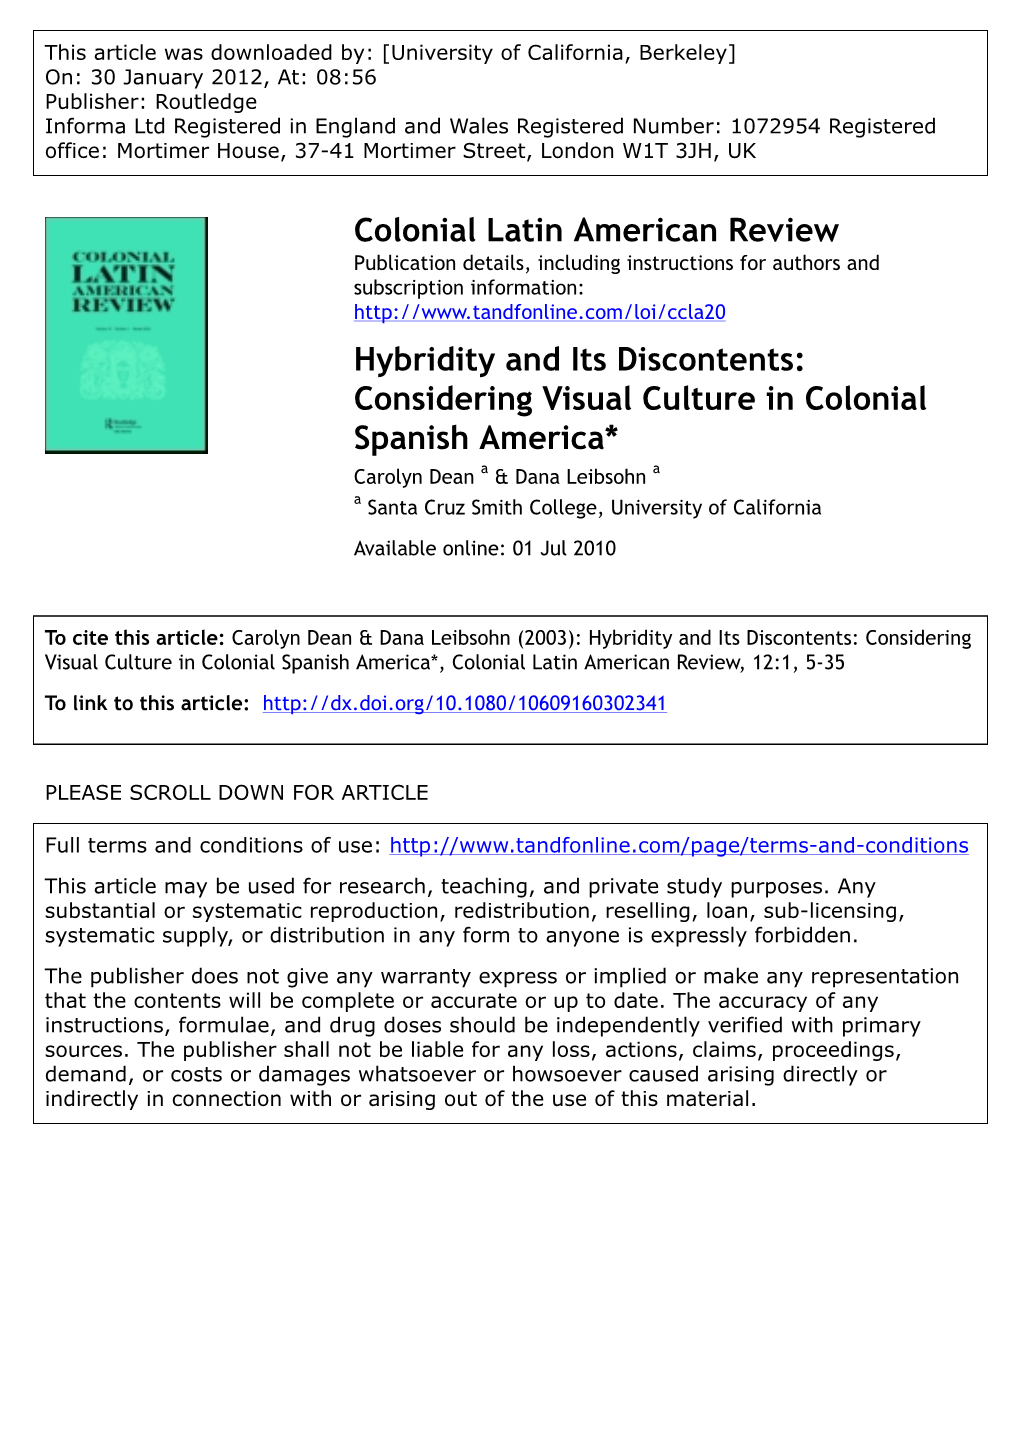 Hybridity and Its Discontents: Considering Visual Culture In